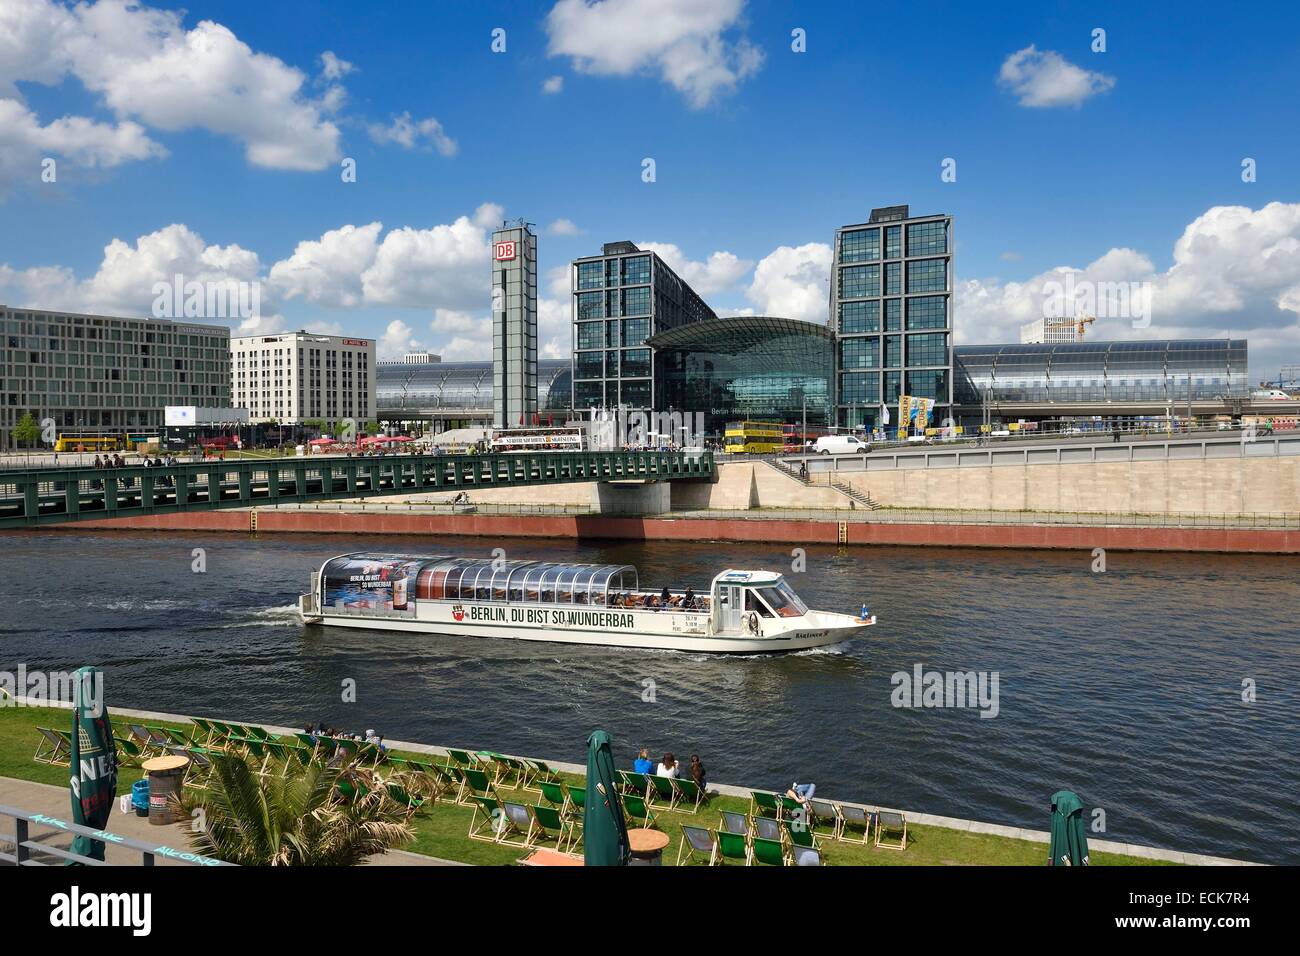 Germany, Berlin, Hauptbahnof central train station by architect Meinhard von Gerkan and the banks of the Spree river Stock Photo